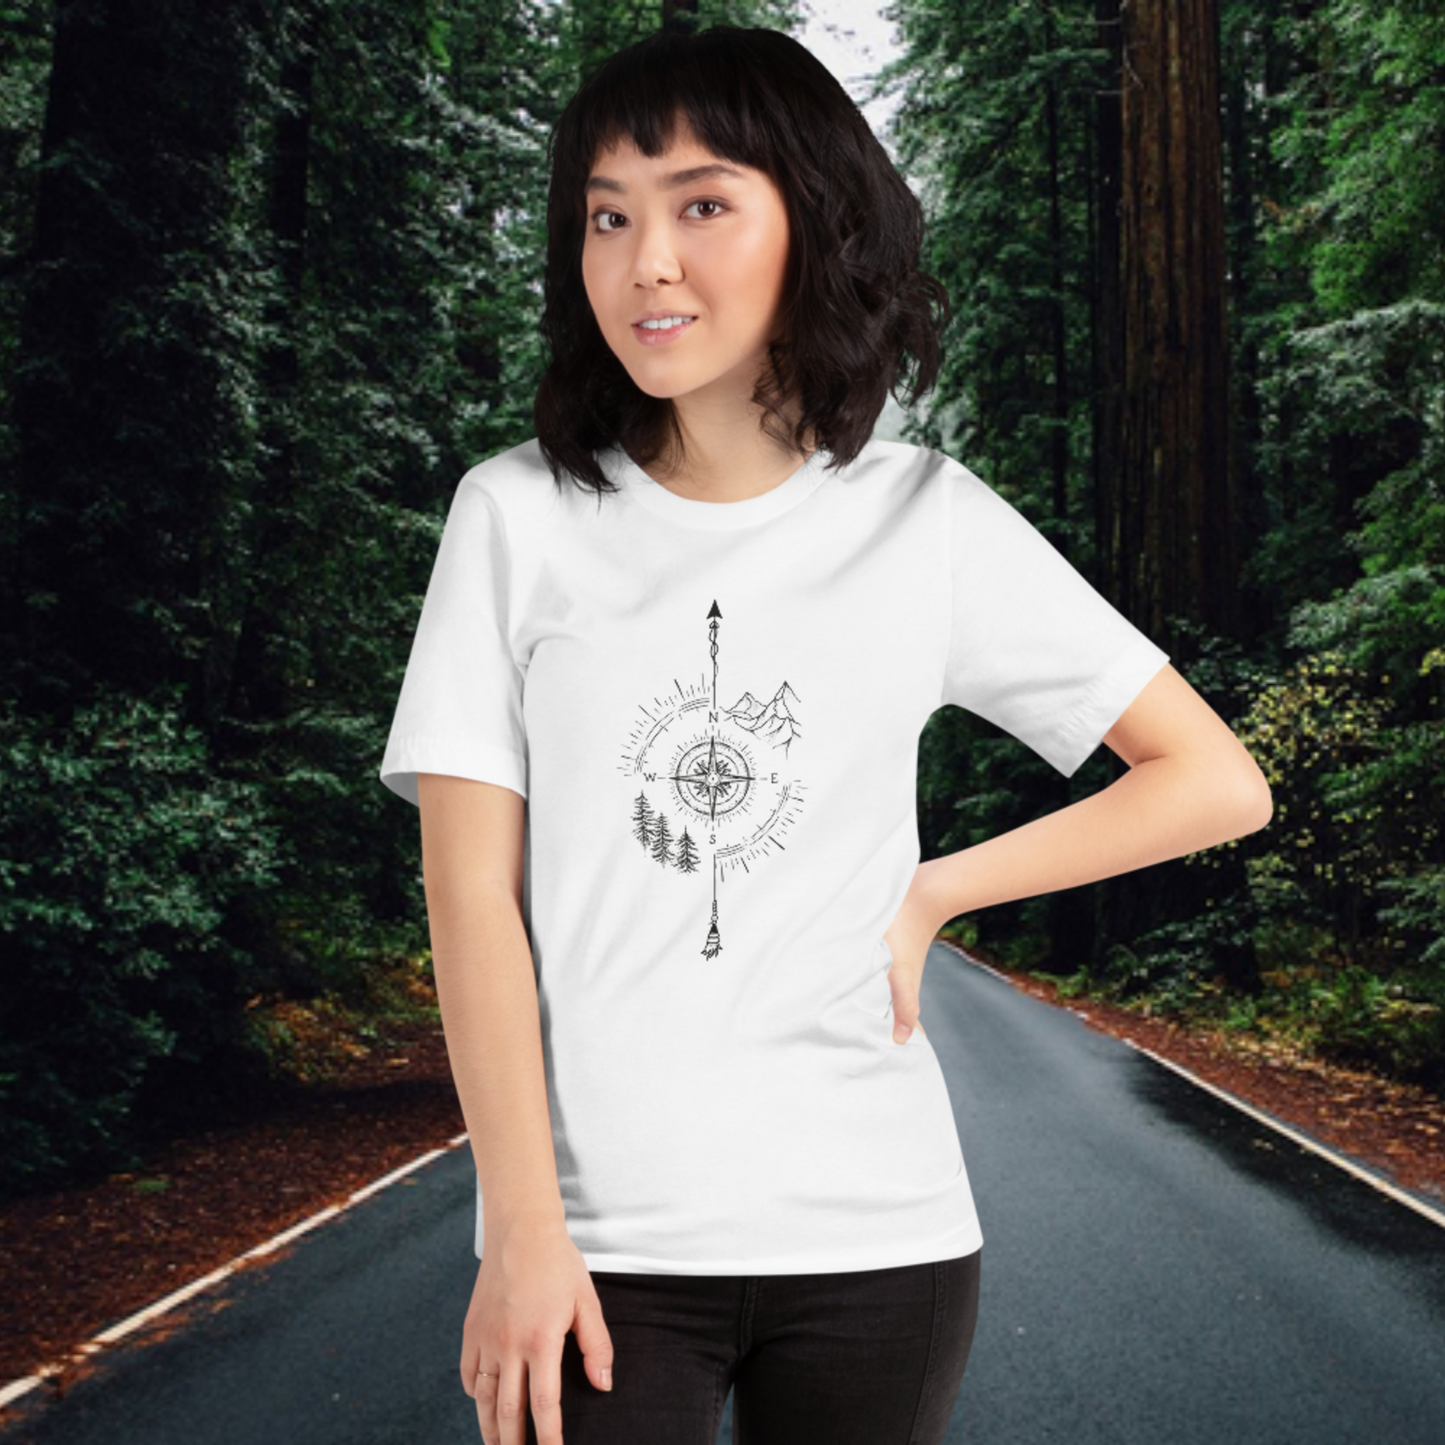 Just Go Mountain - Unisex Tees, Graphic T Shirts for Women, Mens Shirts, Cotton Graphic Shirt